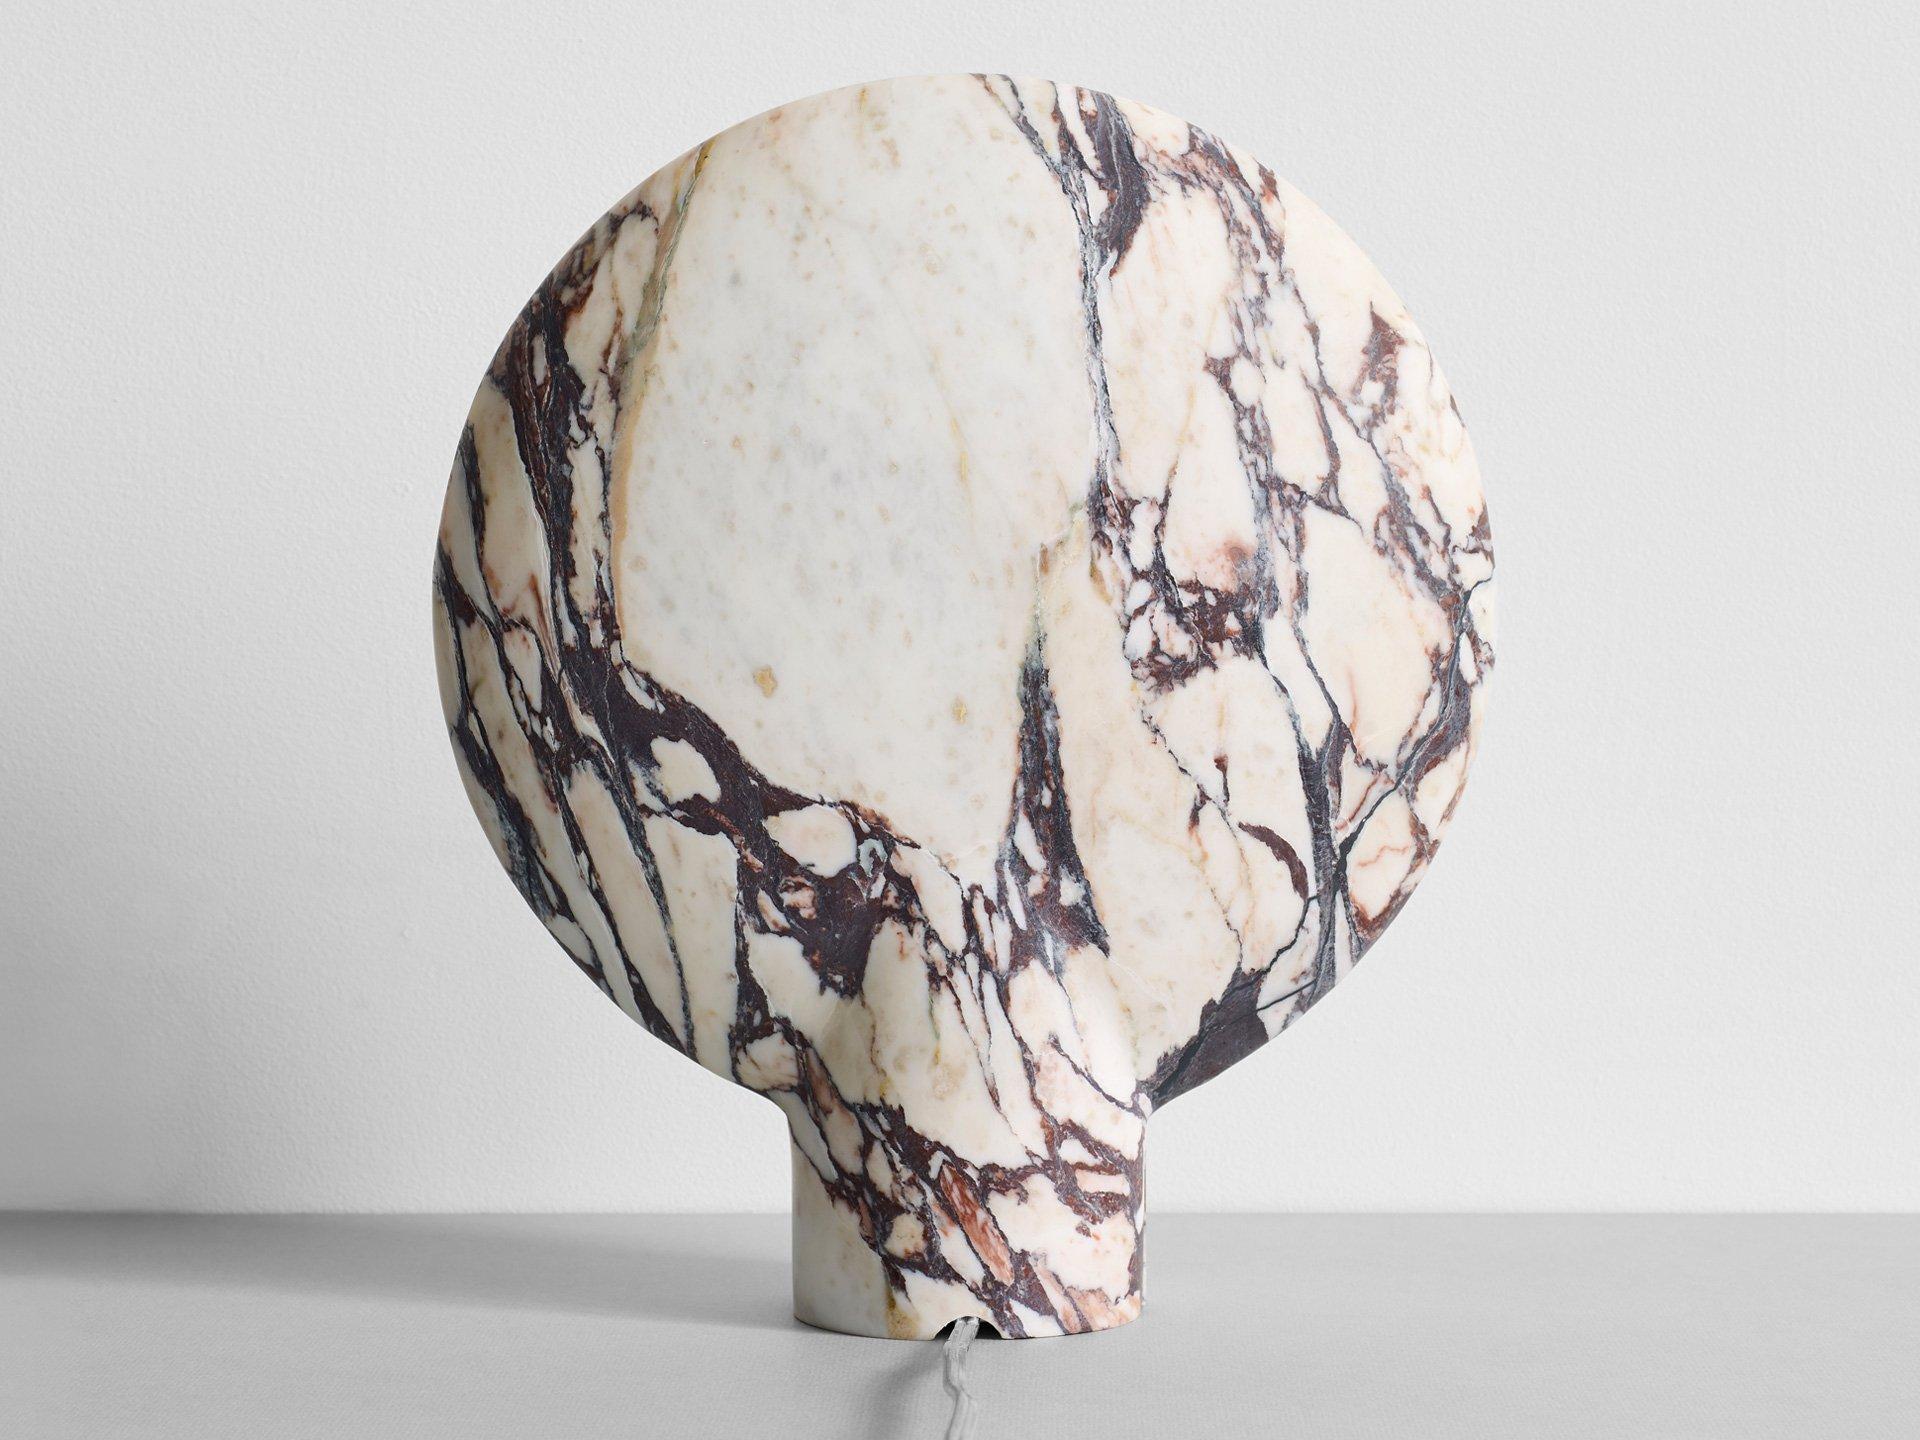 Sculpted Calacatta Viola marble lamp by Henry Wilson
This sculptural item is handmade in Sydney Australia.

The lamp is an ambient, sculptural light carved in two halves from solid stone.

Each light is manufactured in natural stone, meaning